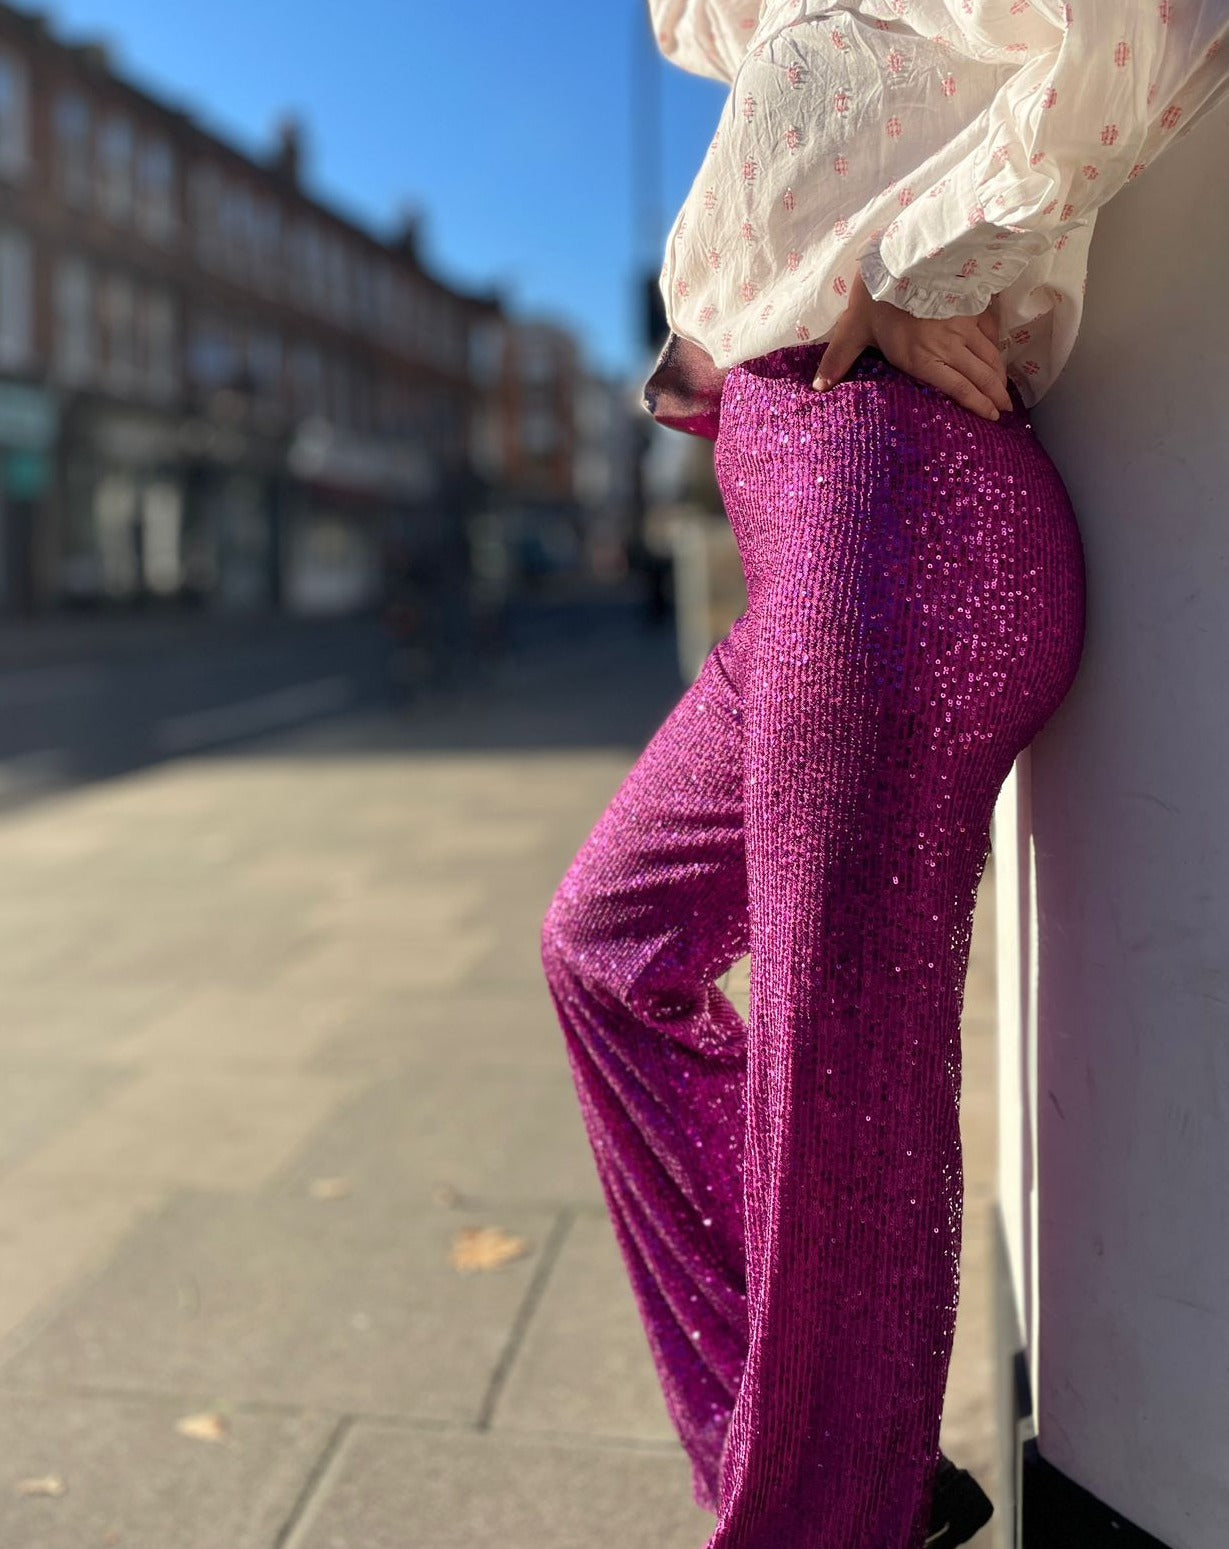 BEE GEES SEQUIN TROUSERS HOT PINK